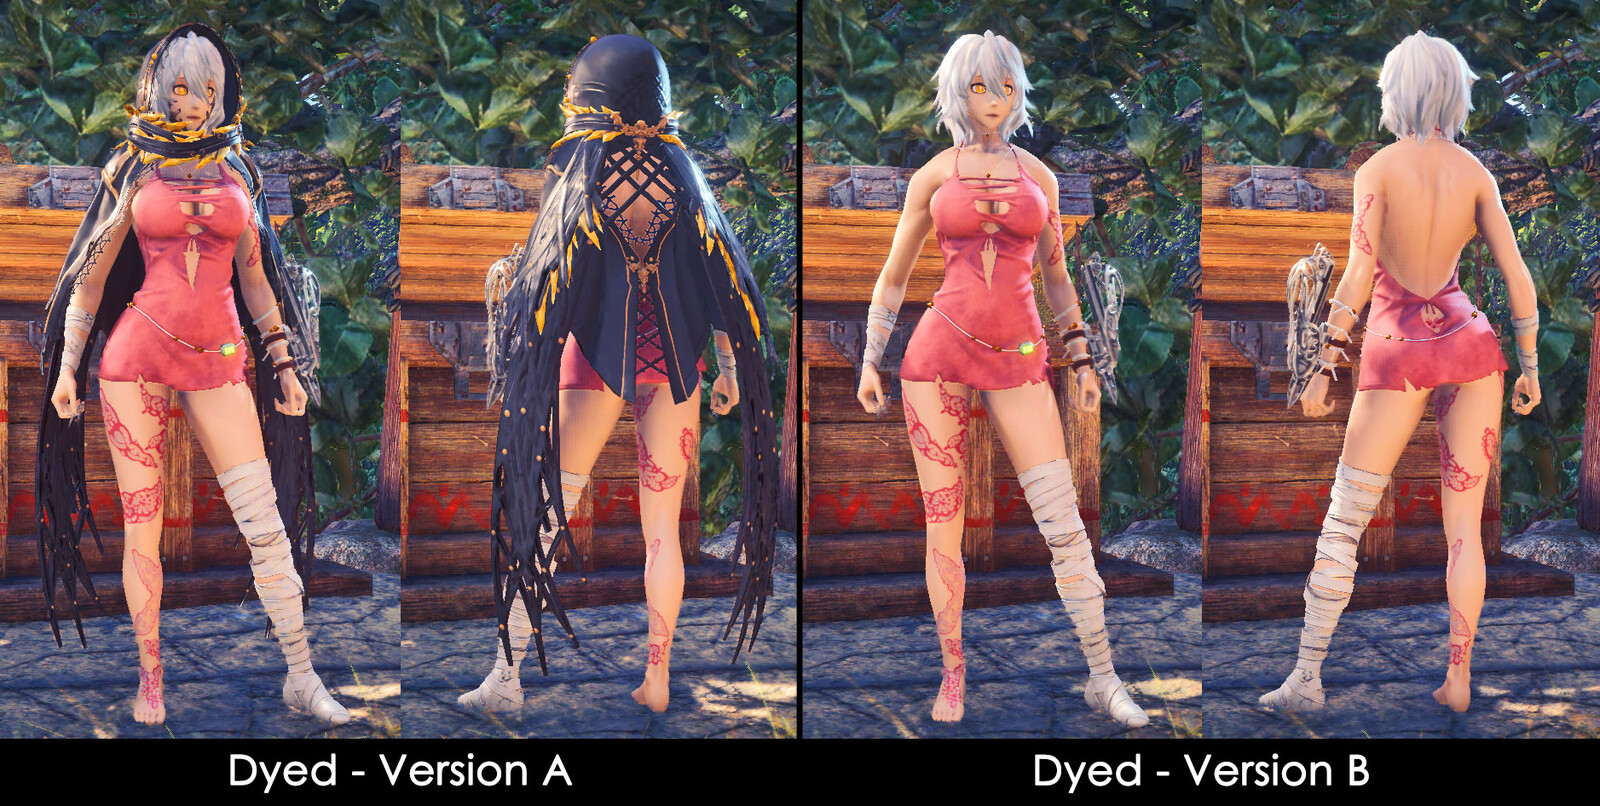 Showing off dye capability for further customization.